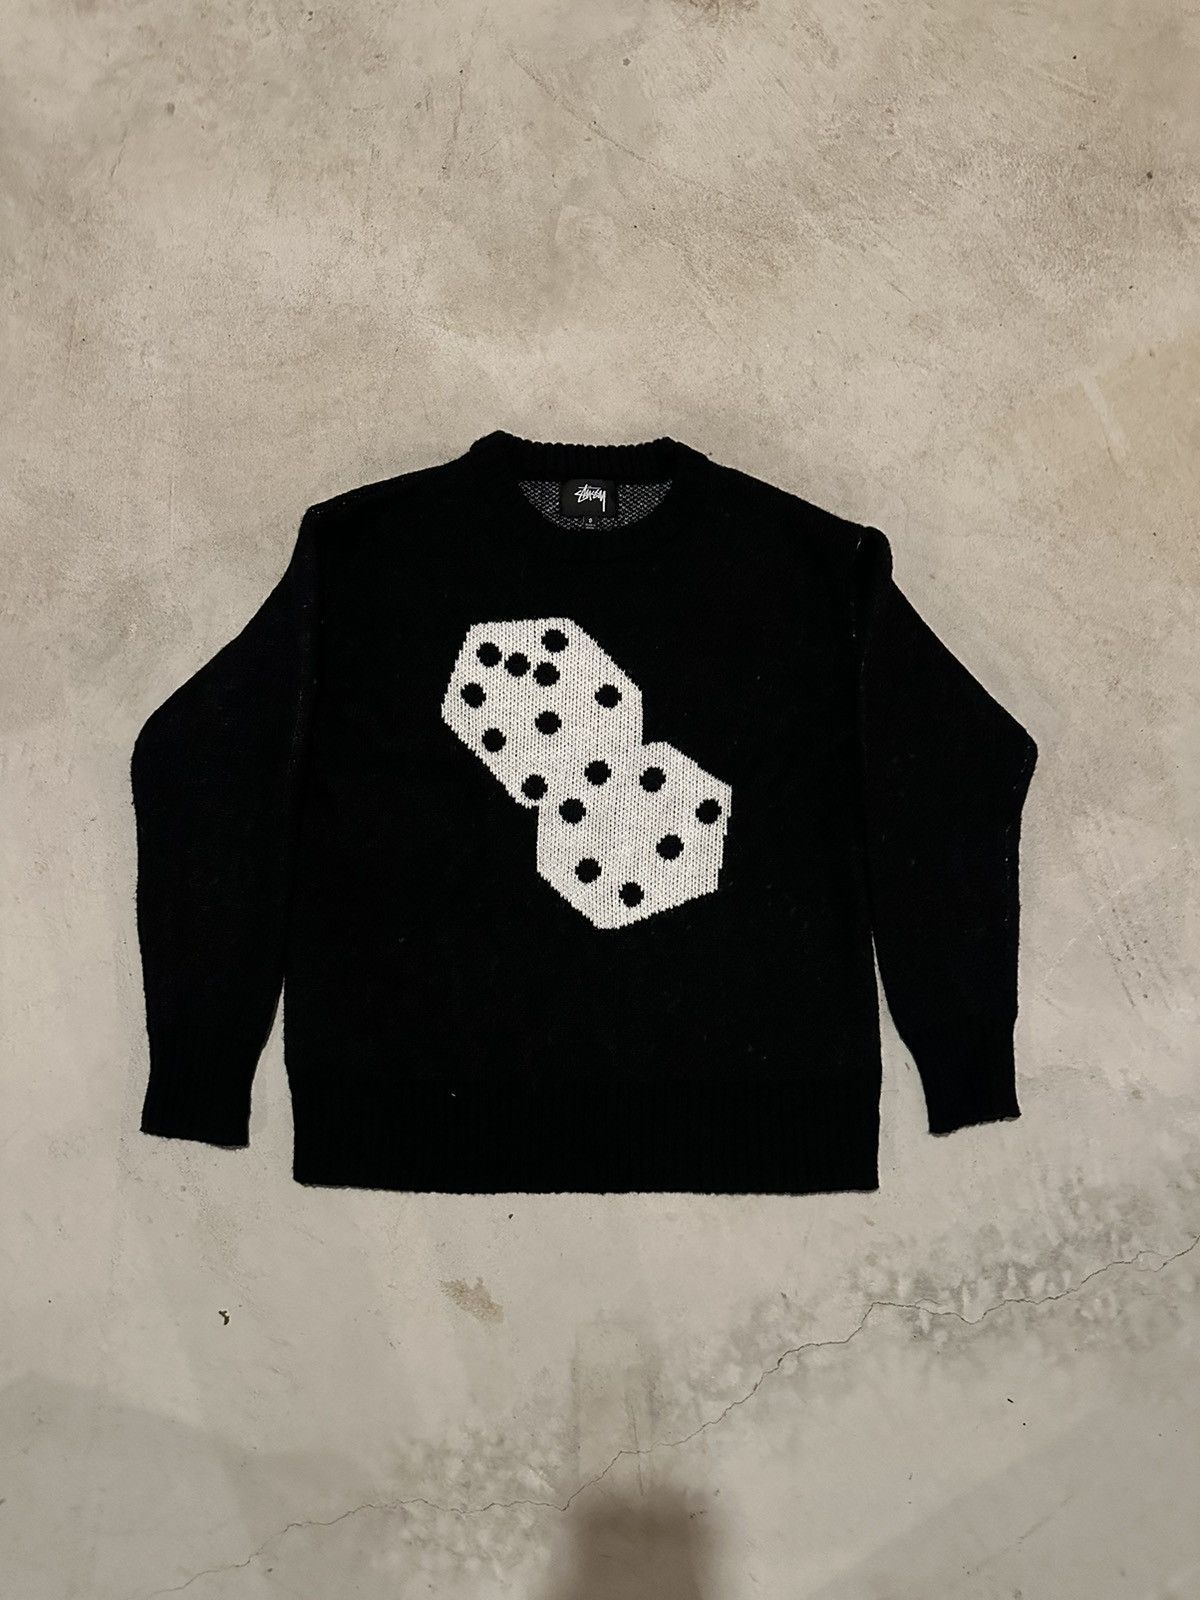 Stussy Stussy Dice Mohair Fuzzy Sweater | Grailed